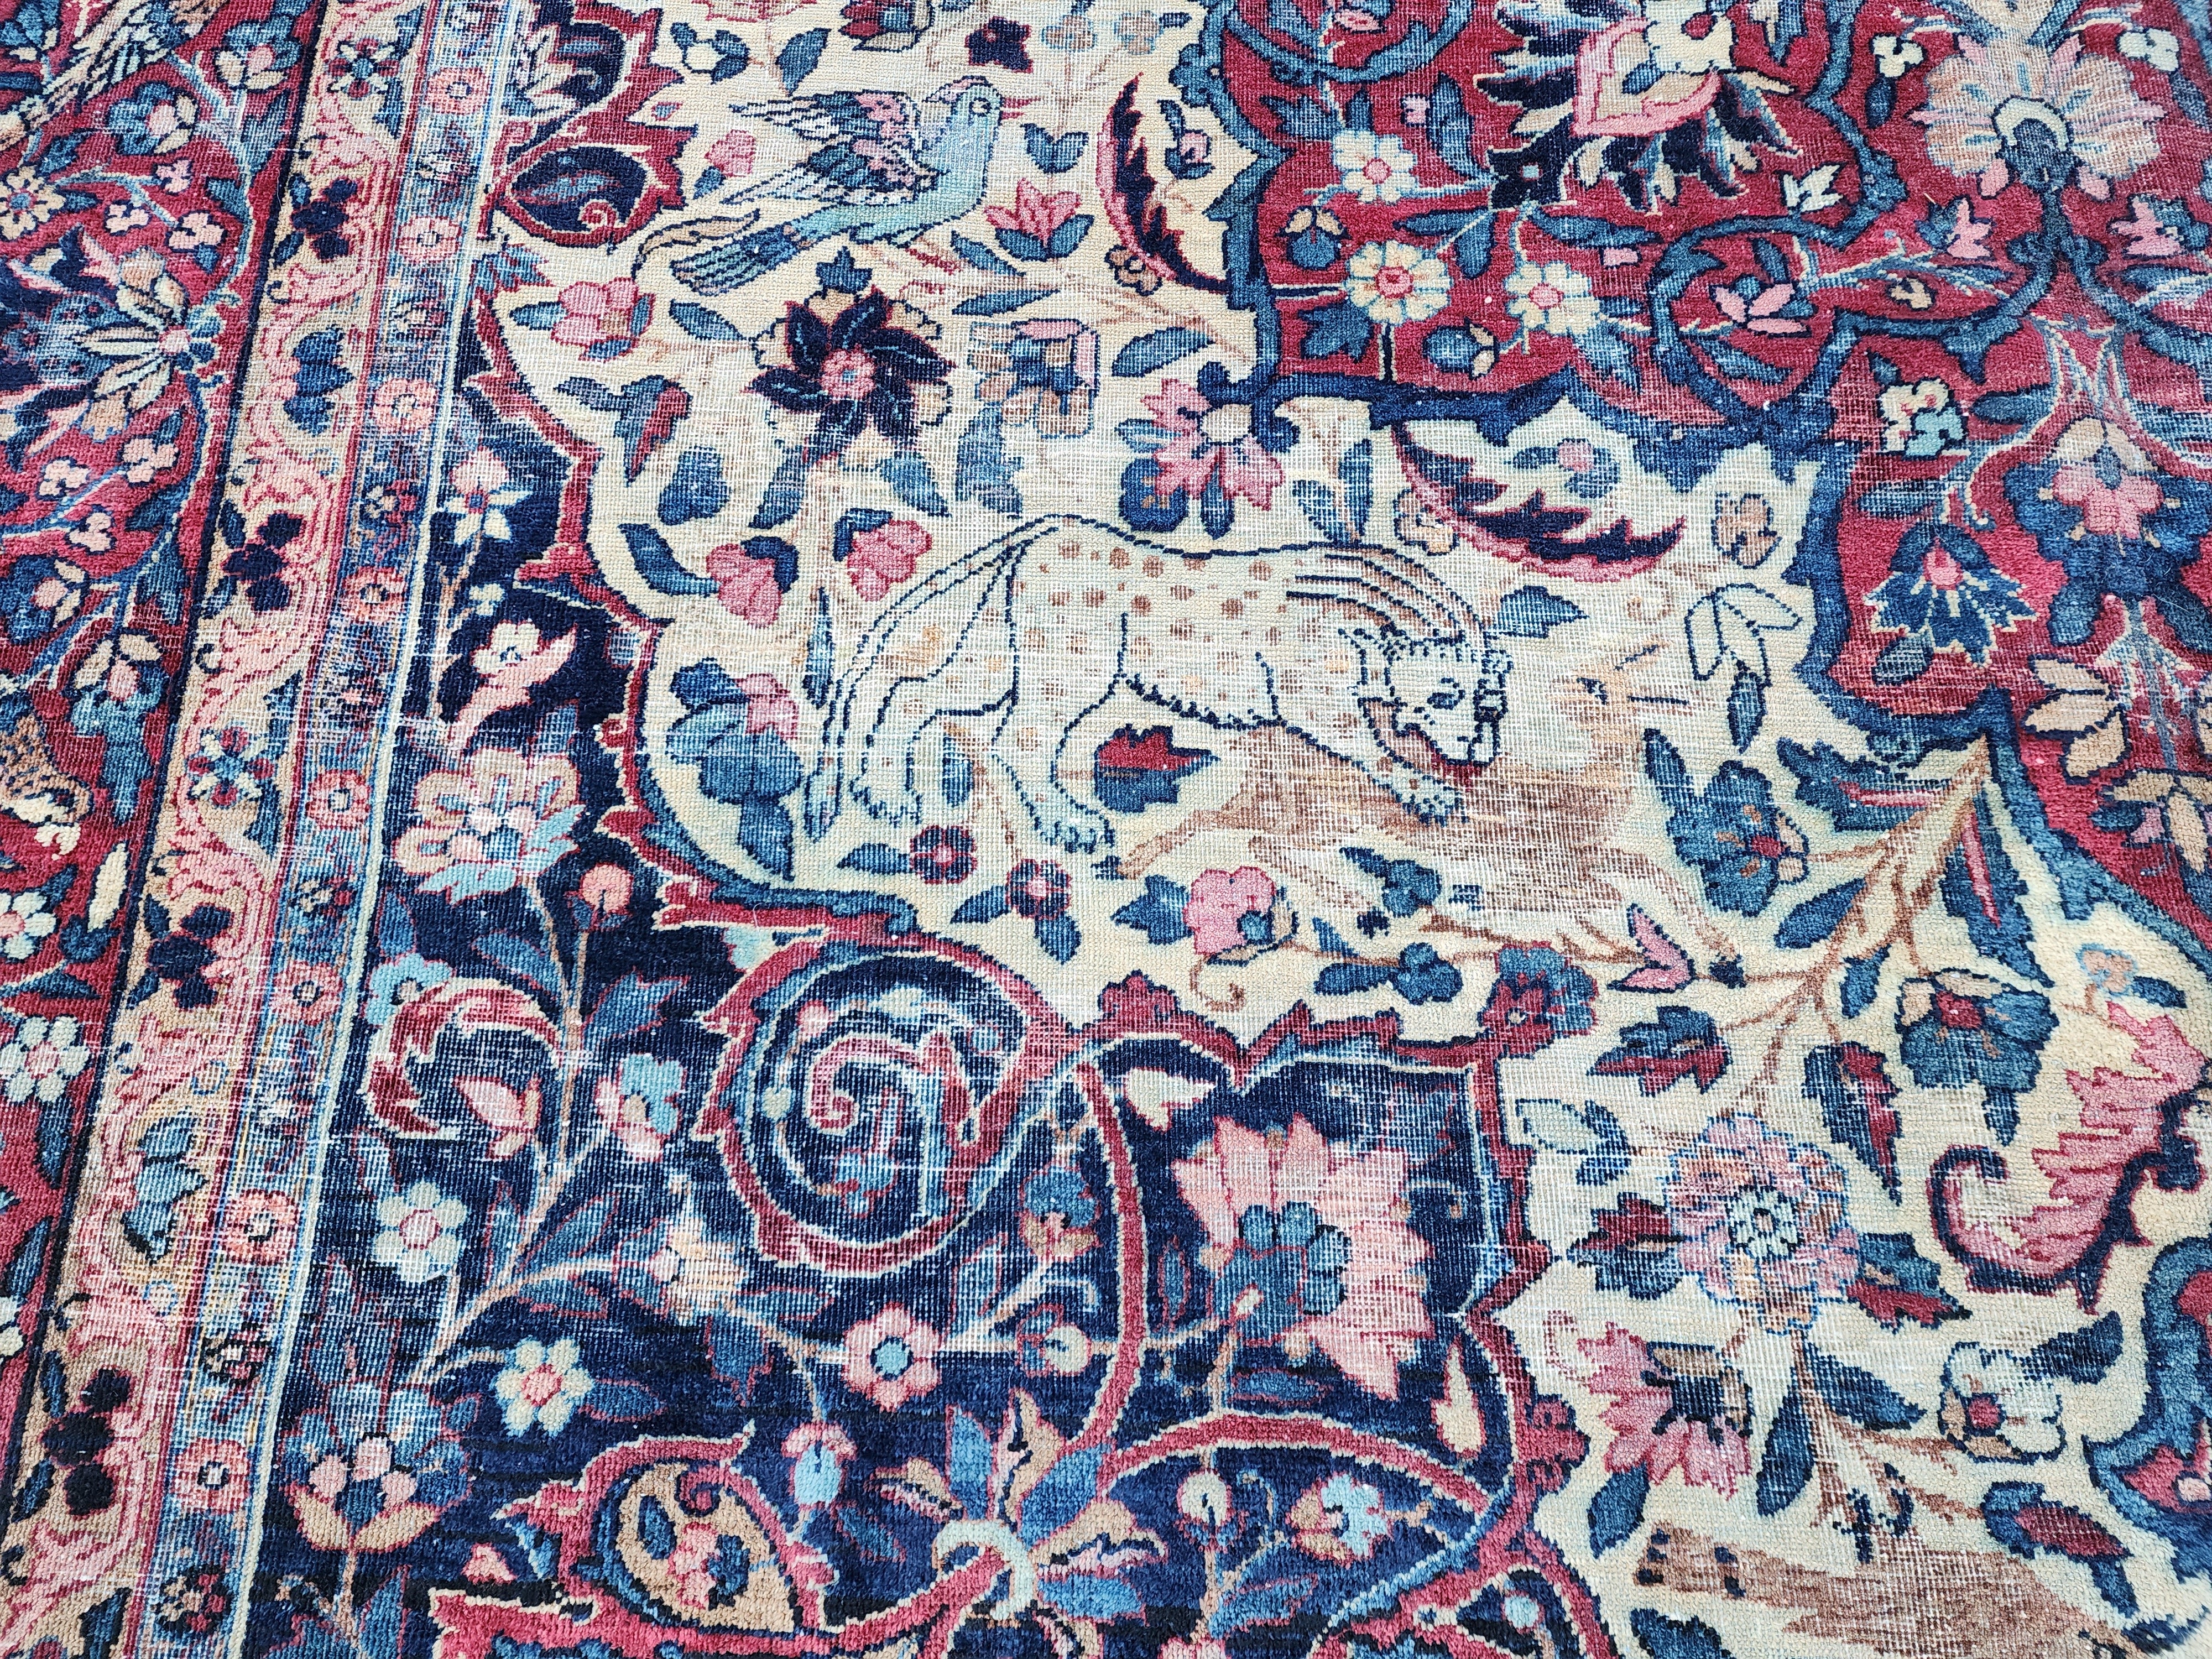 Antique Persian Rug, 11 ft x 8 ft, X Large Blue. Red and White Floral Medallion Turkish Rug Handmade from Natural Wool